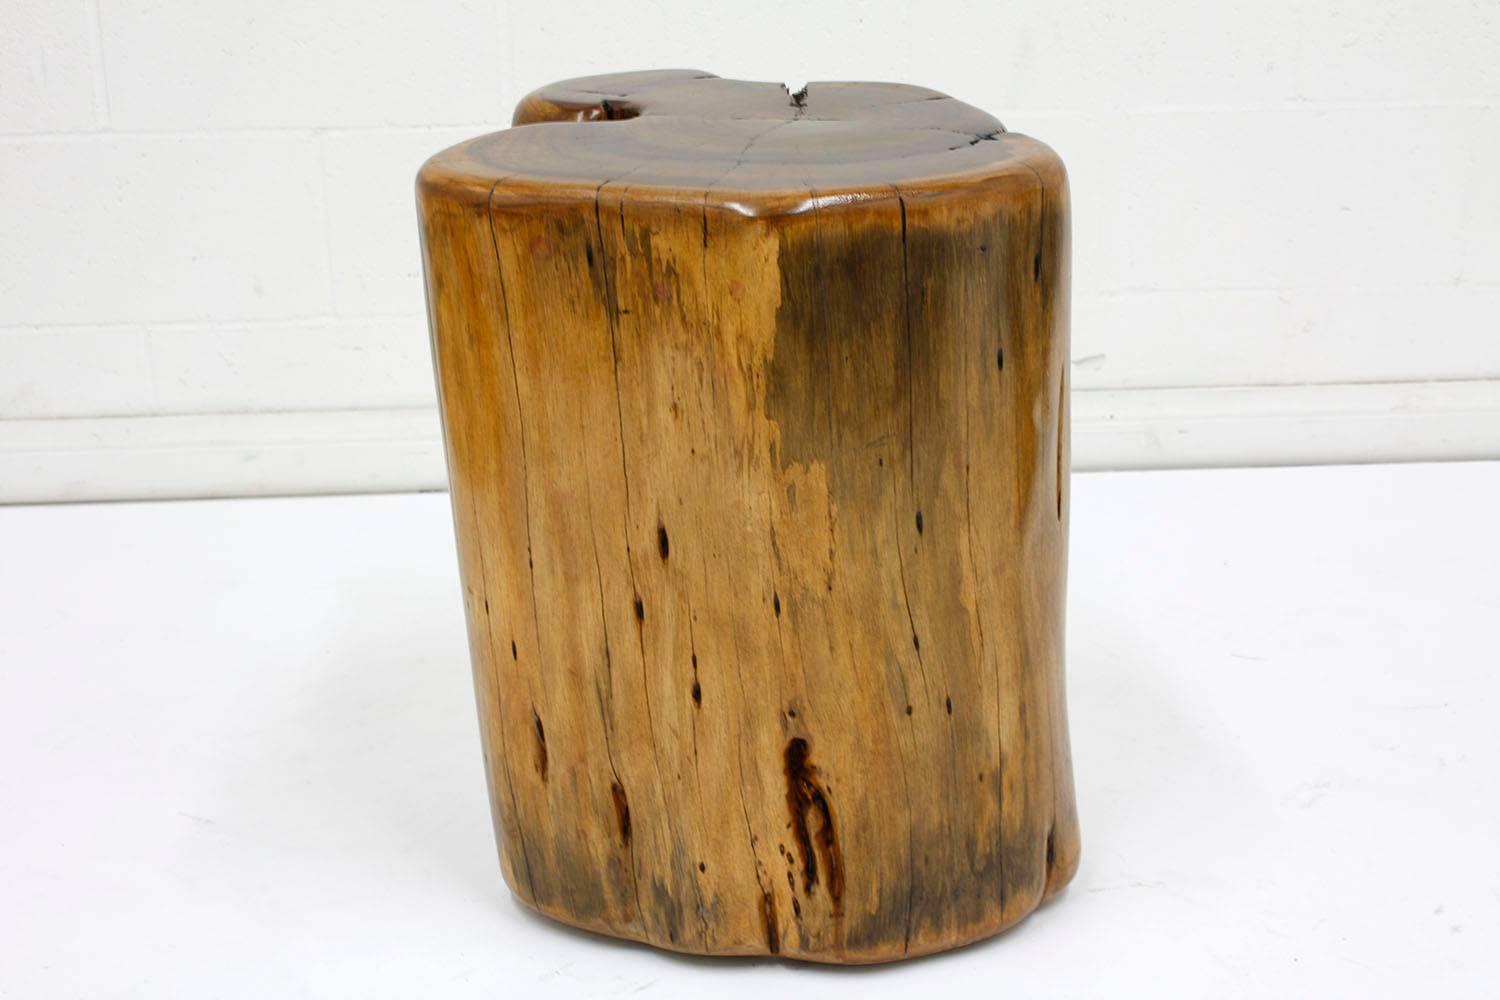 Organic Modern Pair of Organic Free-Form Wood Stump Side Tables or Stools